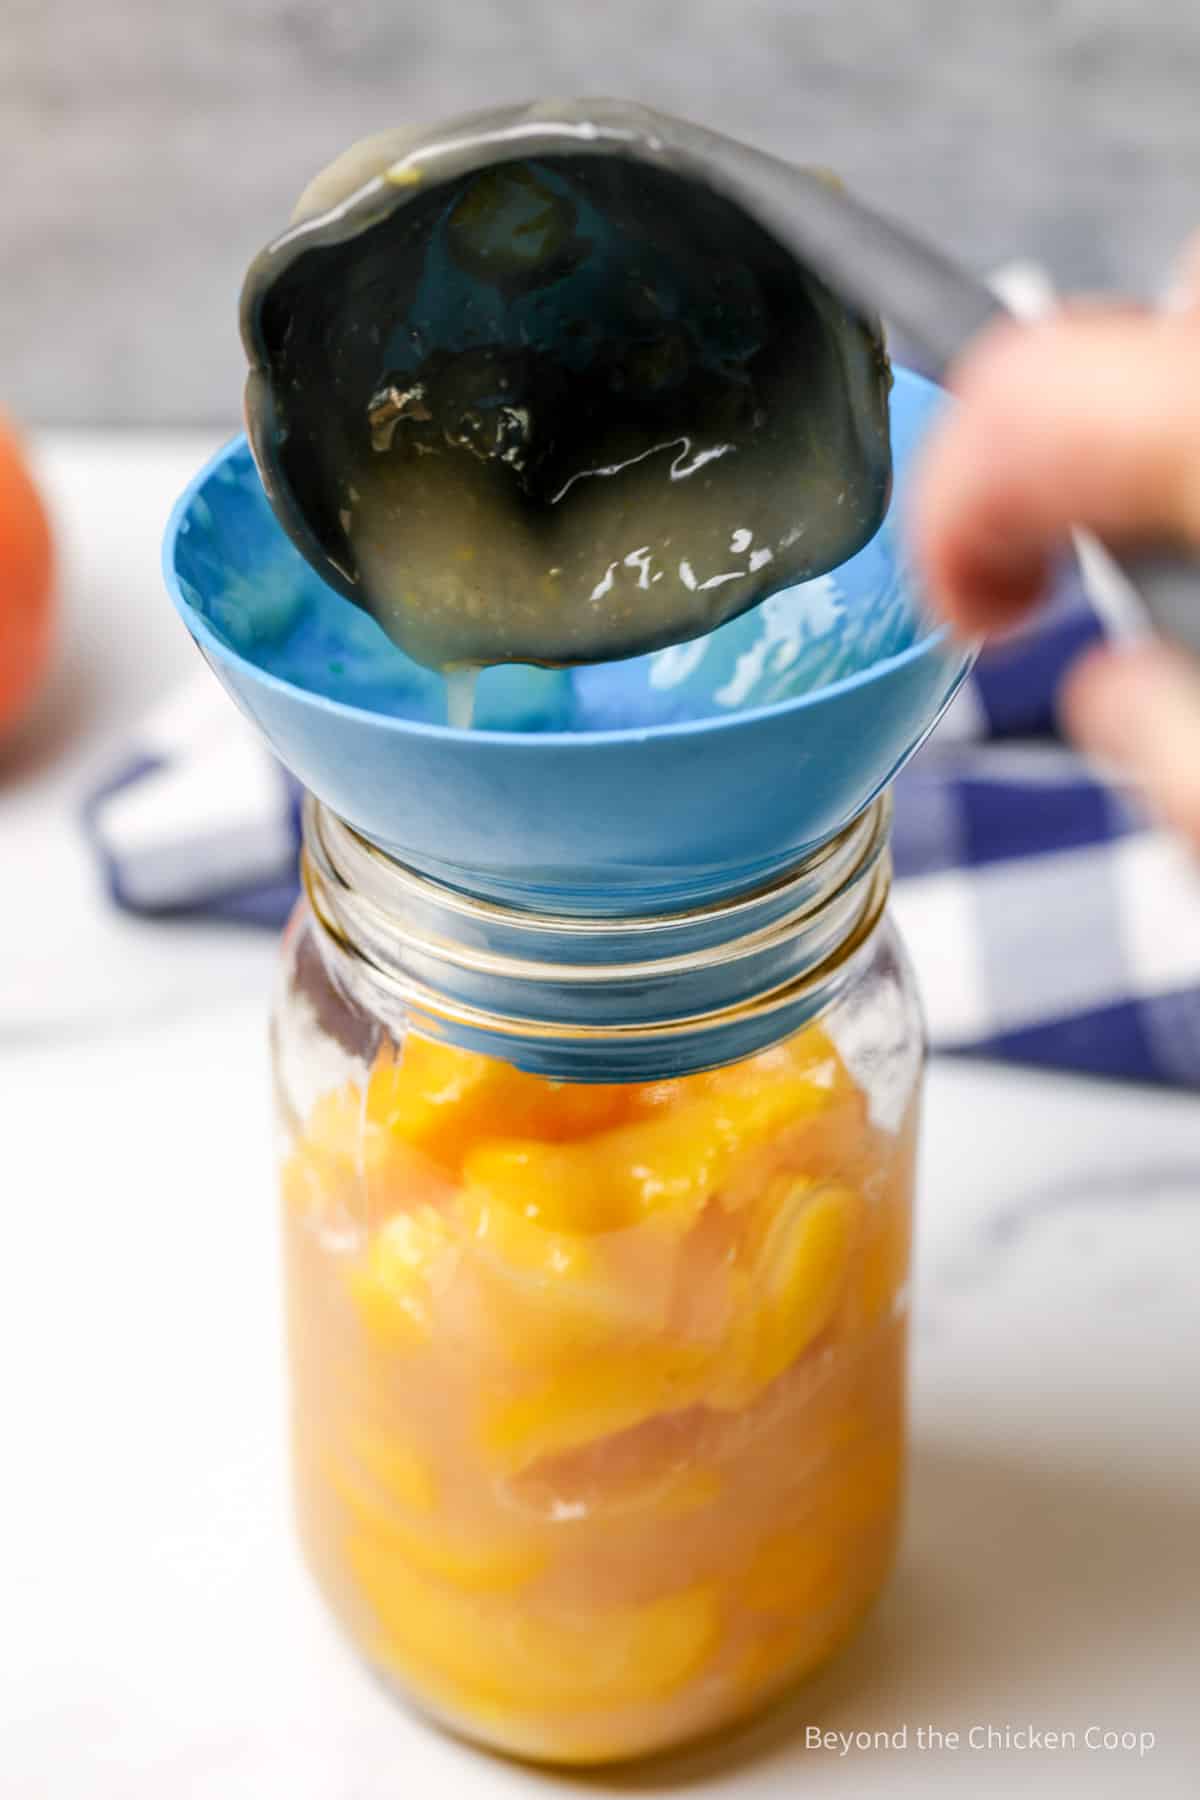 Pouring peach filling into a quart sized jar.